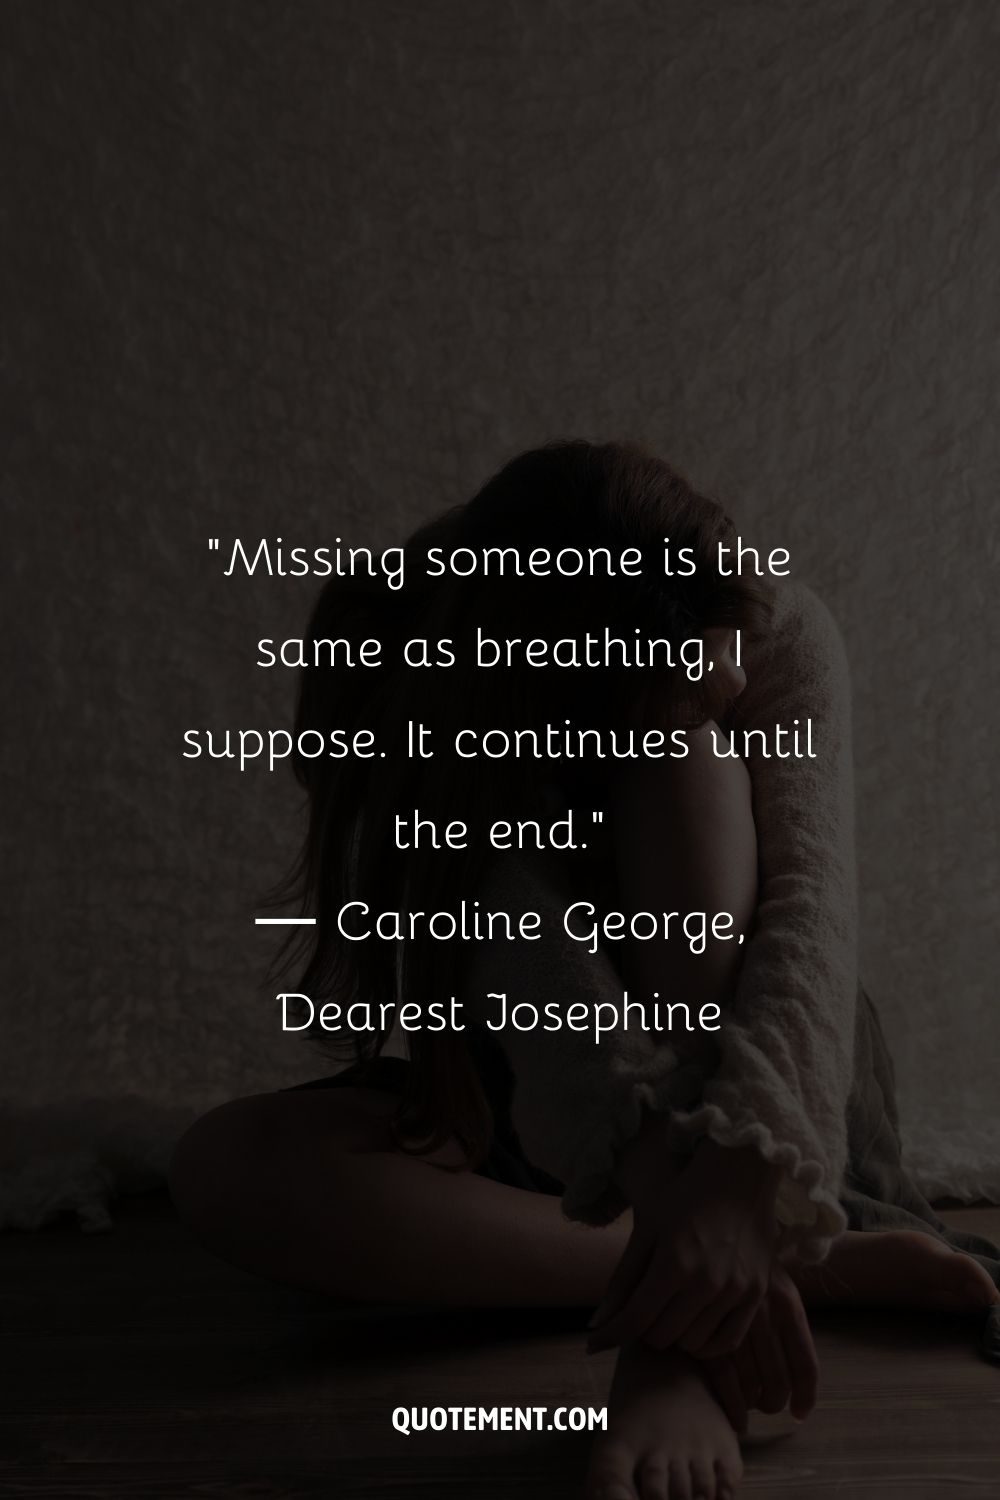 Missing someone is the same as breathing, I suppose. It continues until the end.